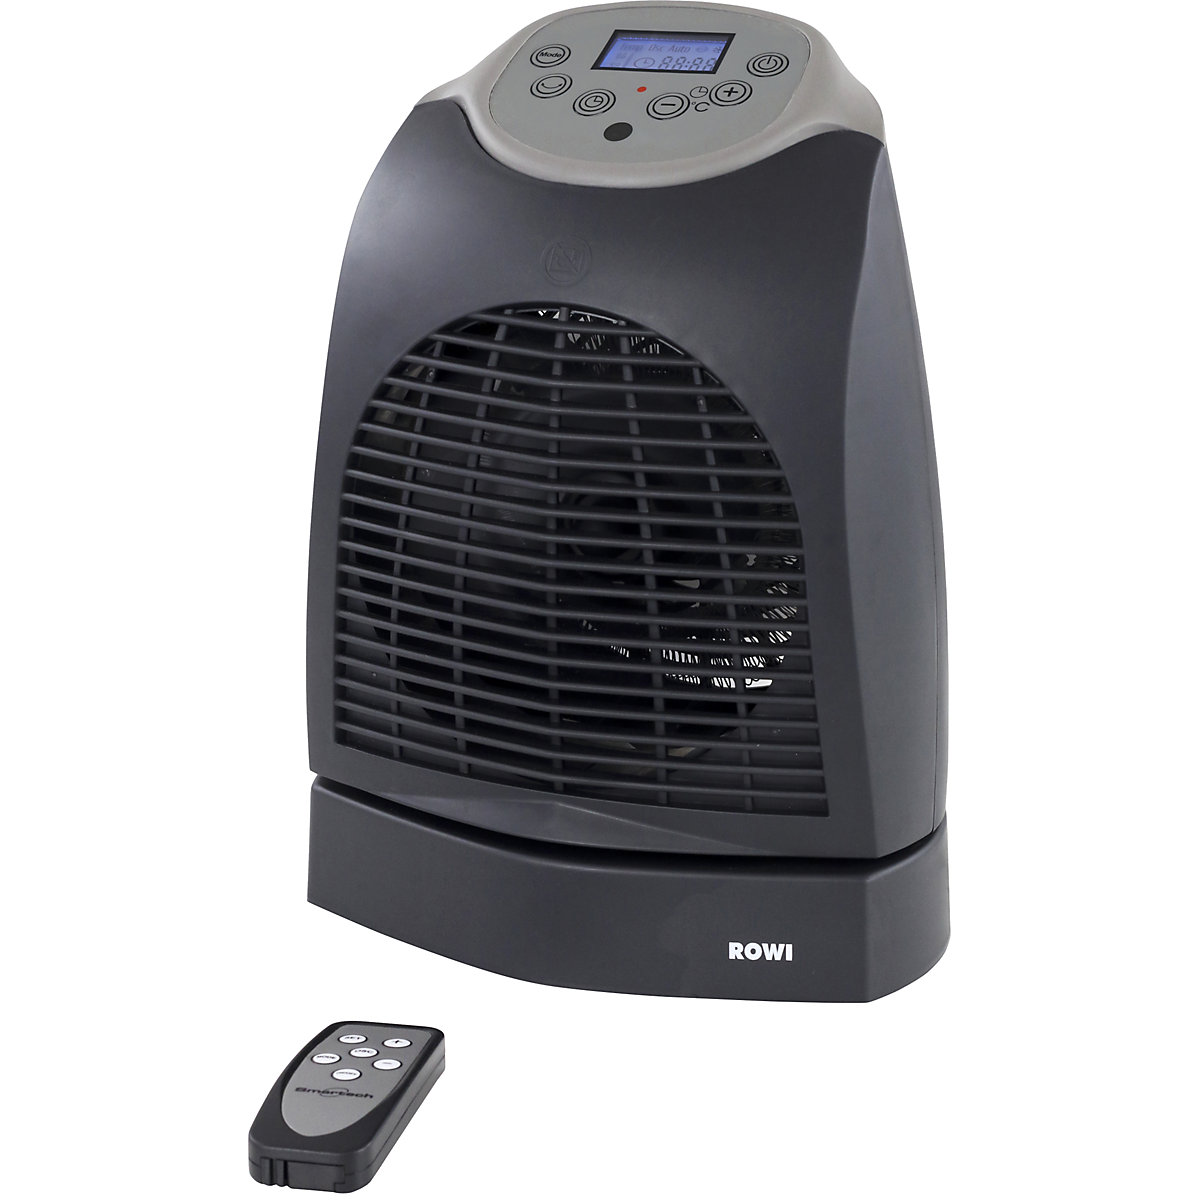 Fan heater with remote control